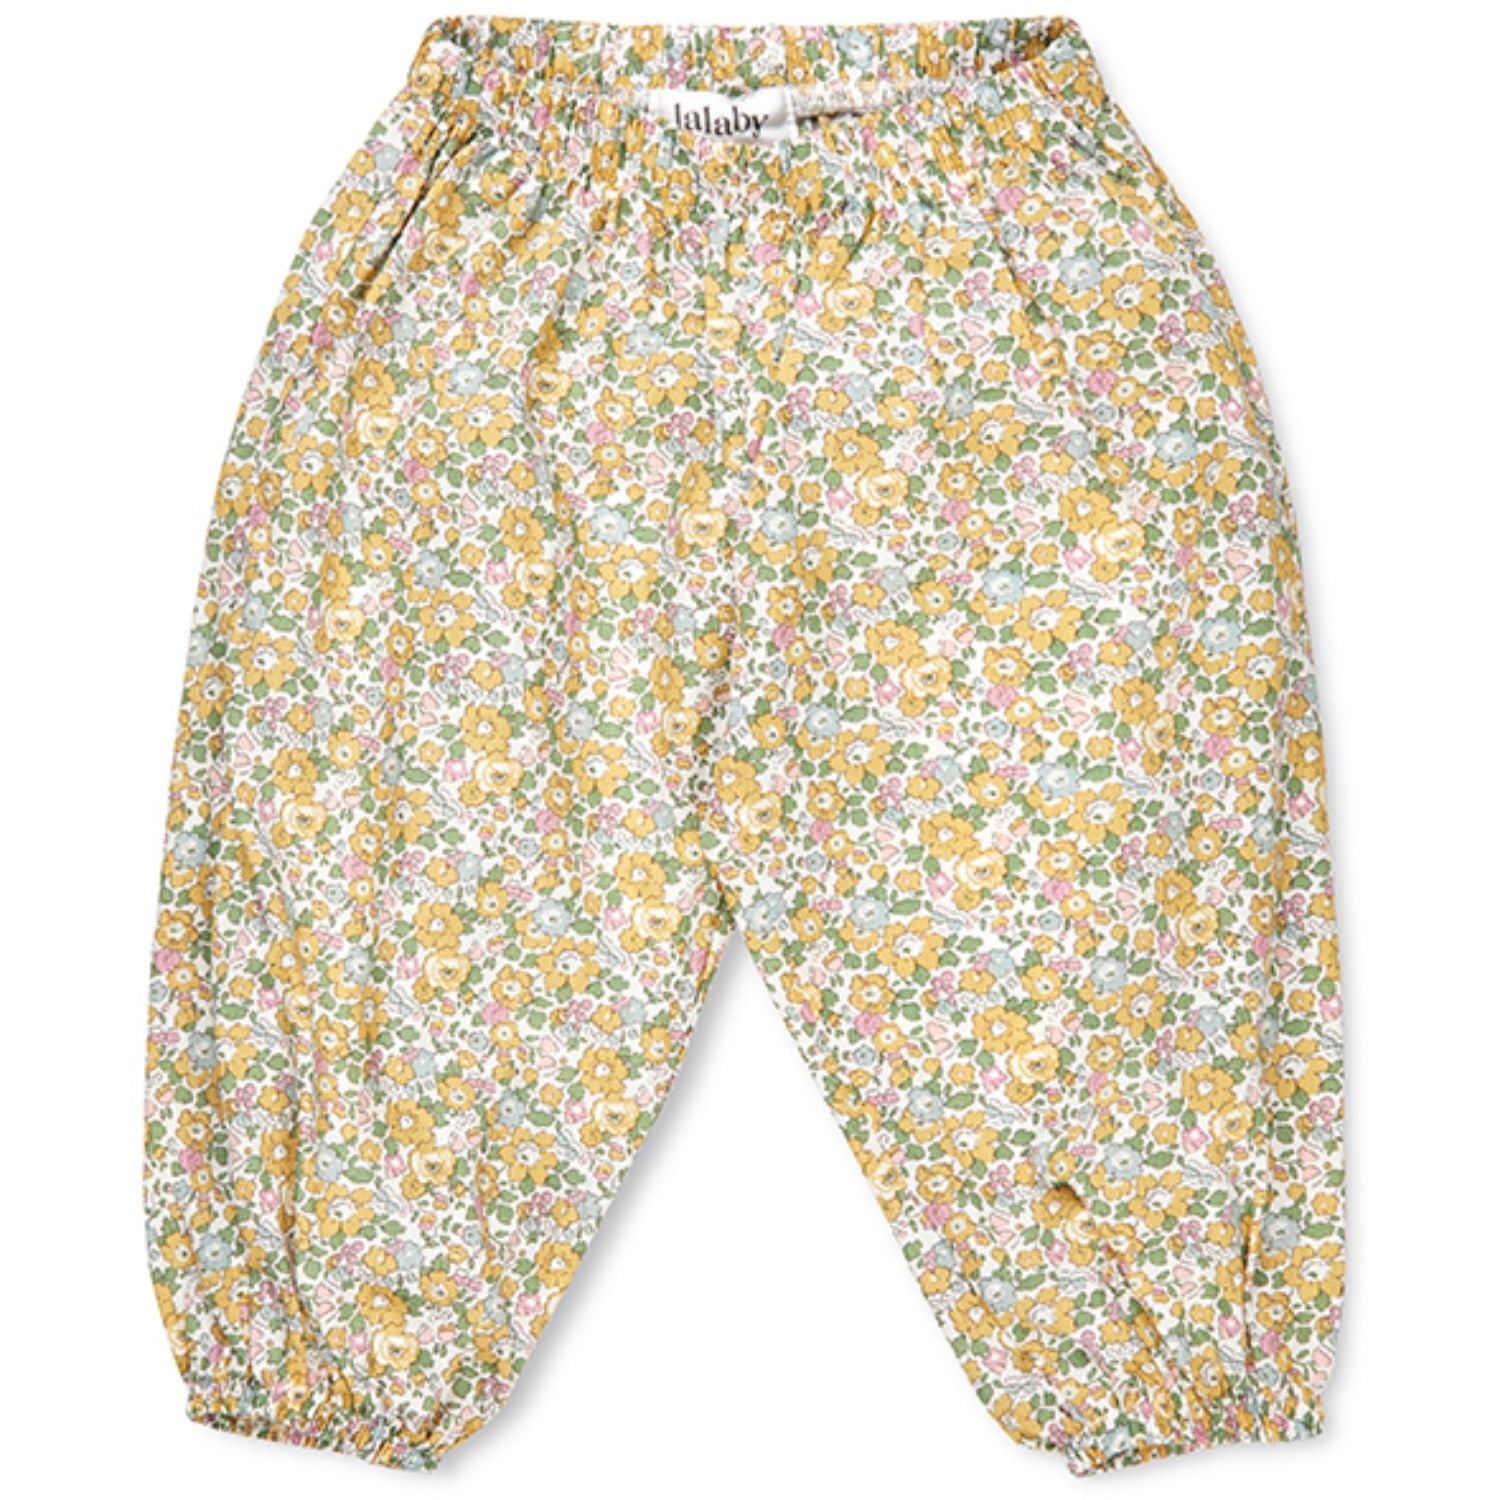 Lalaby Betsy Ann Pixi Pants - Betsy Ann